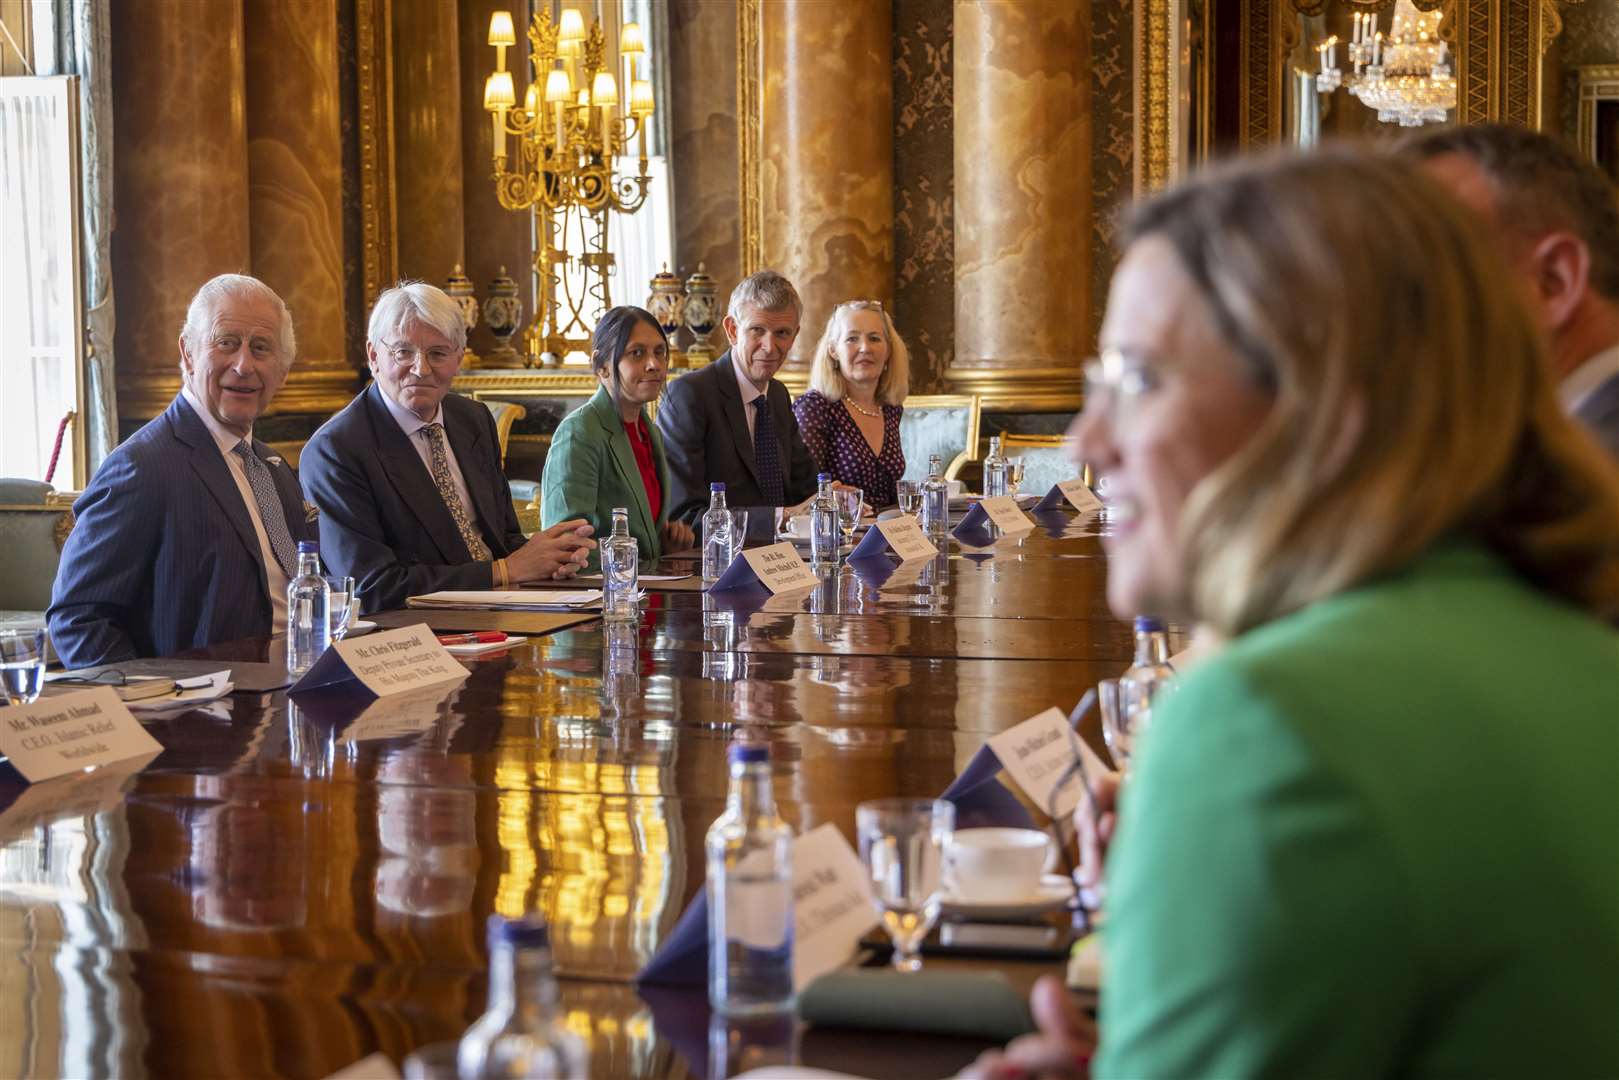 The King during the meeting with representatives from the charities of the Disasters Emergency Committee at Buckingham Palace (Andy Aitchison/DEC/PA)